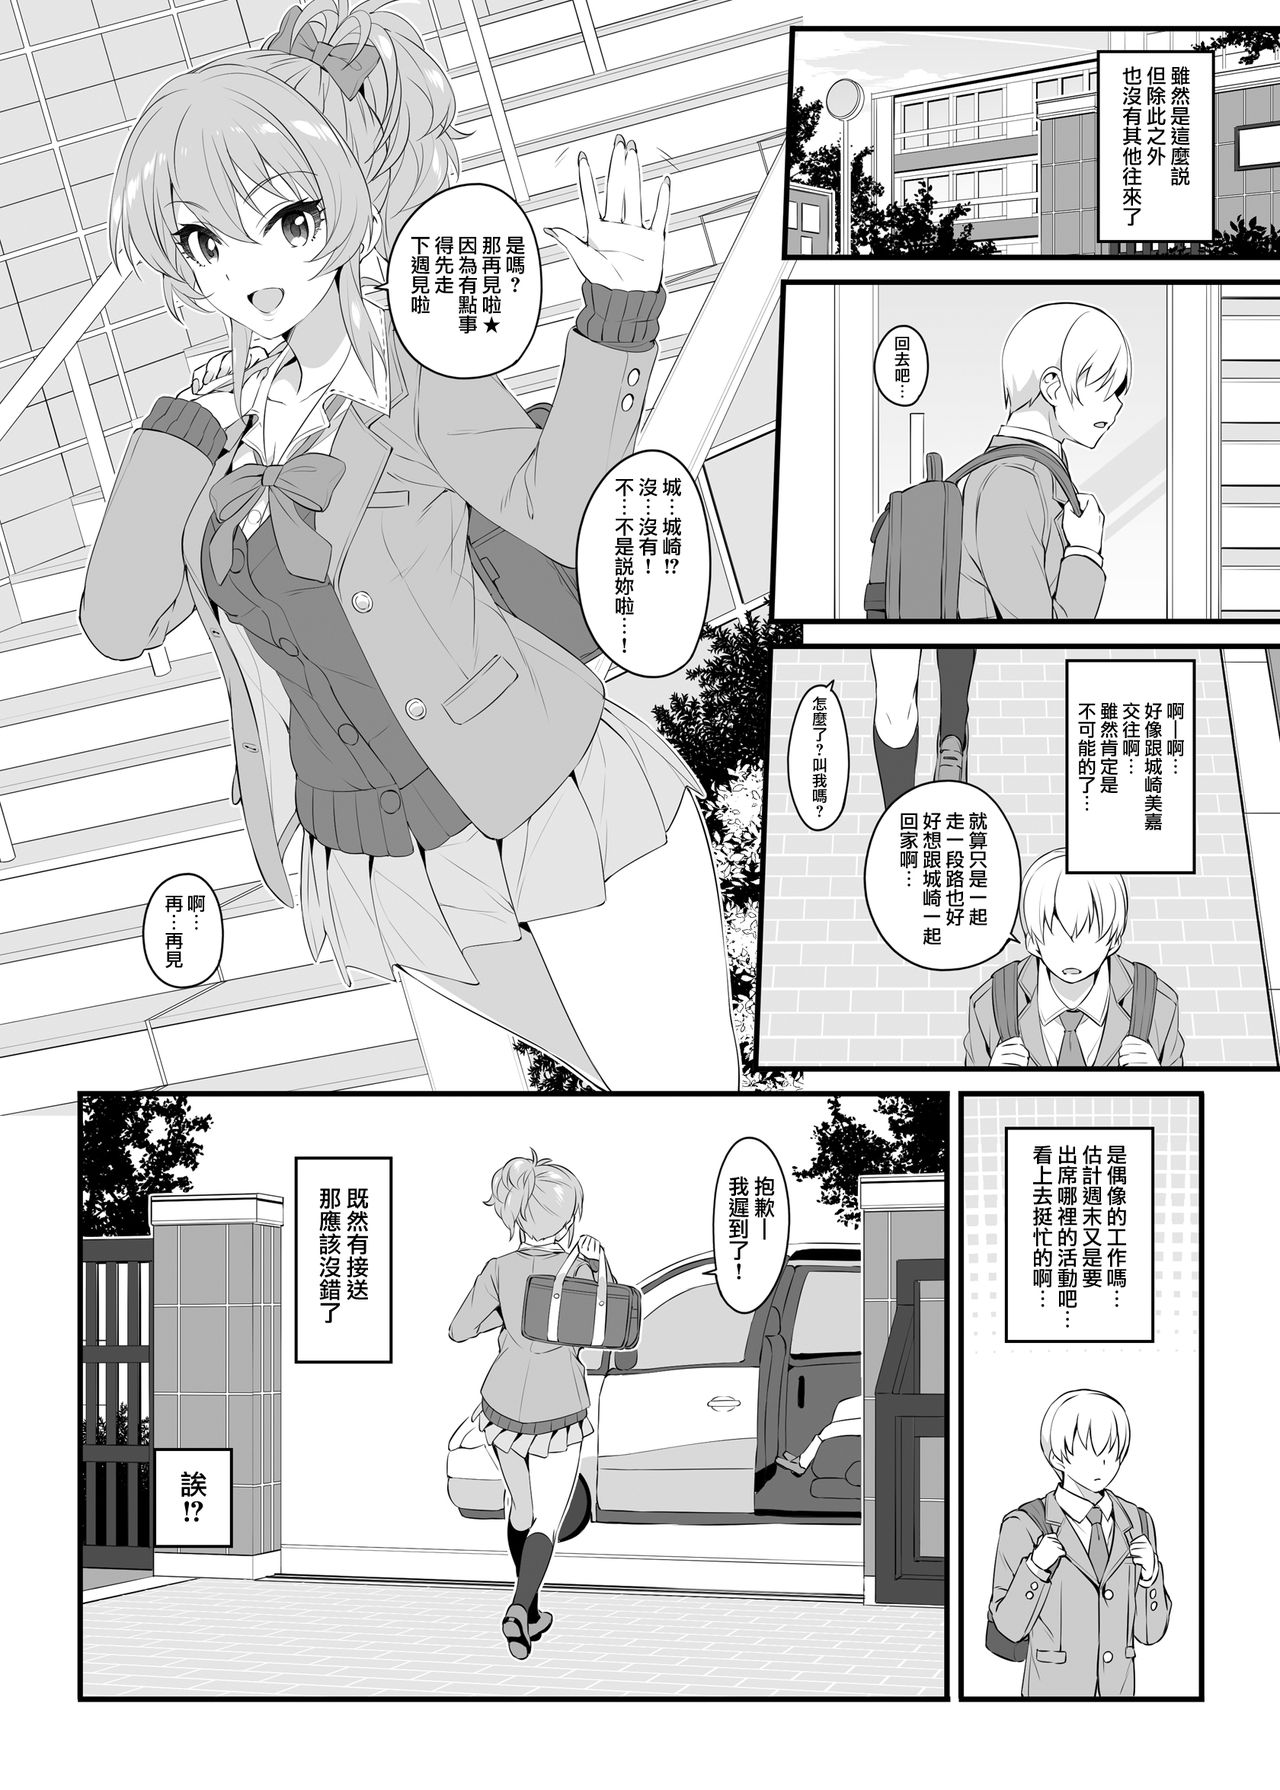 [Jekyll and Hyde (MAKOTO)] The first secret meeting of the Charismatic Queens. (THE IDOLM@STER CINDERELLA GIRLS) [Chinese] [無邪気漢化組] [Digital] page 6 full